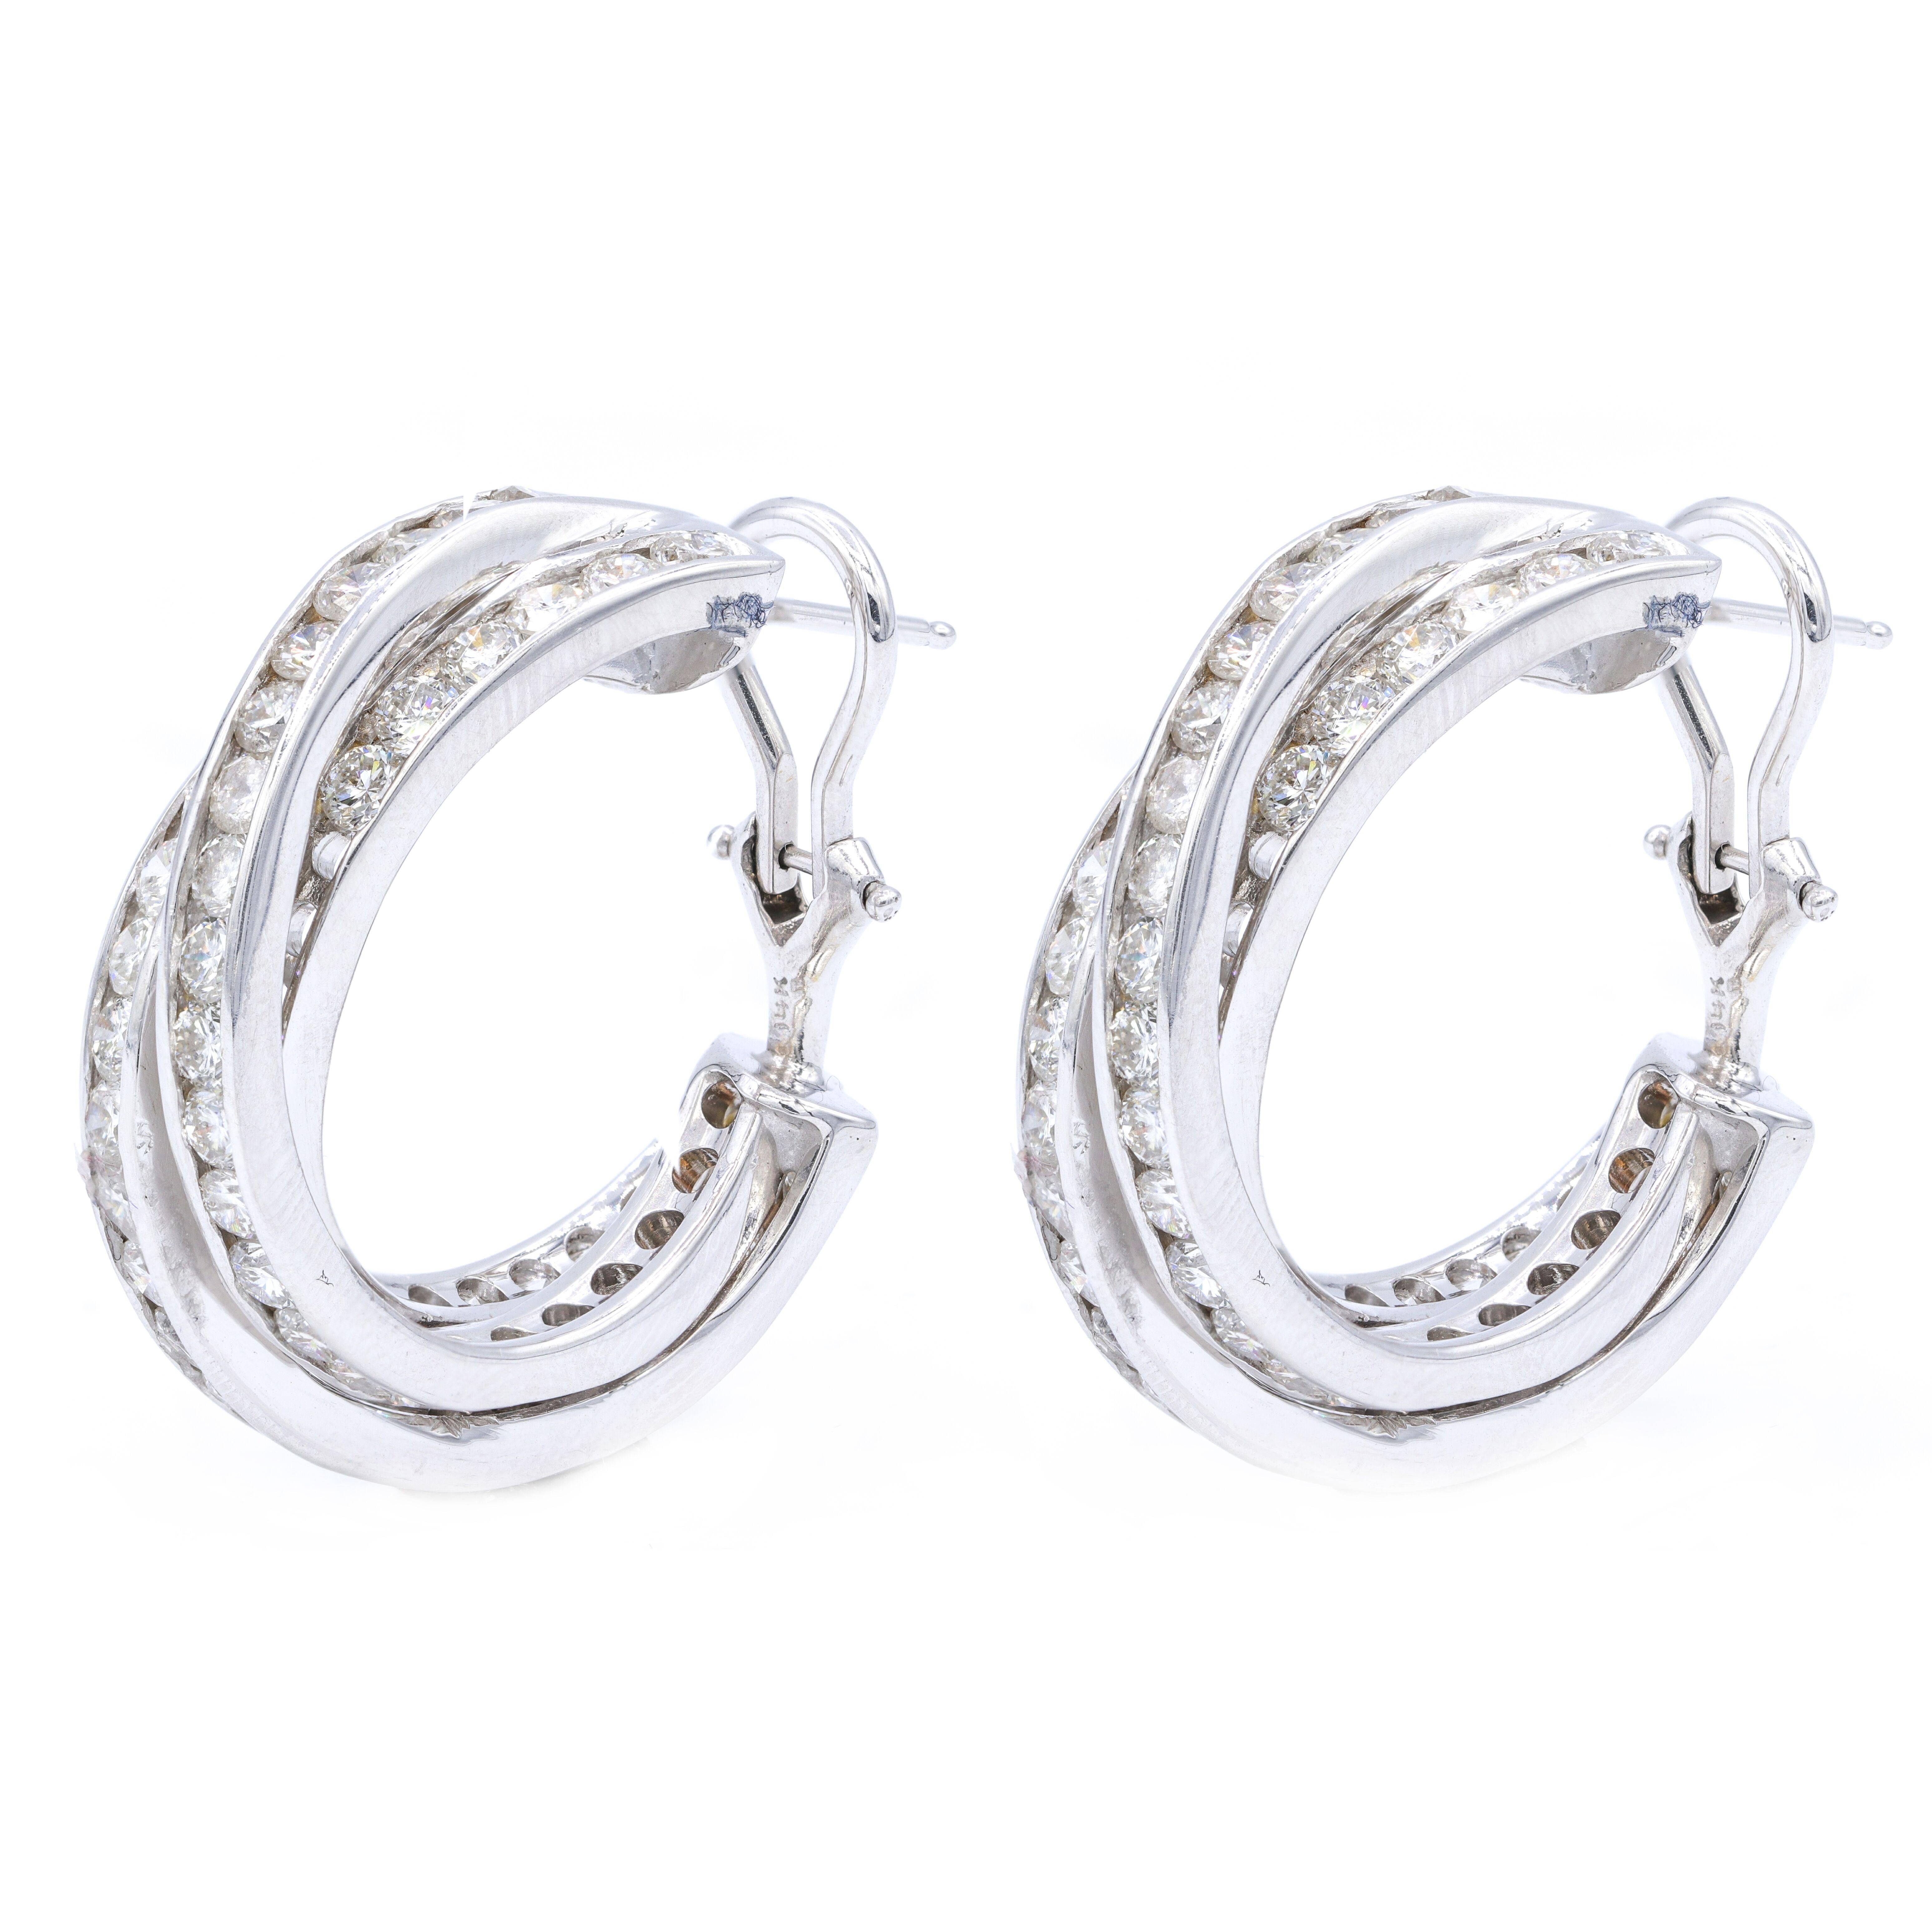 14K White Gold Diamond Earrings featuring 6.50 Carat T.W. of Natural Diamonds

Underline your look with this sharp 14K White Gold Diamond Earrings. High quality Diamonds. This Earrings will underline your exquisite look for any occasion.

. is a